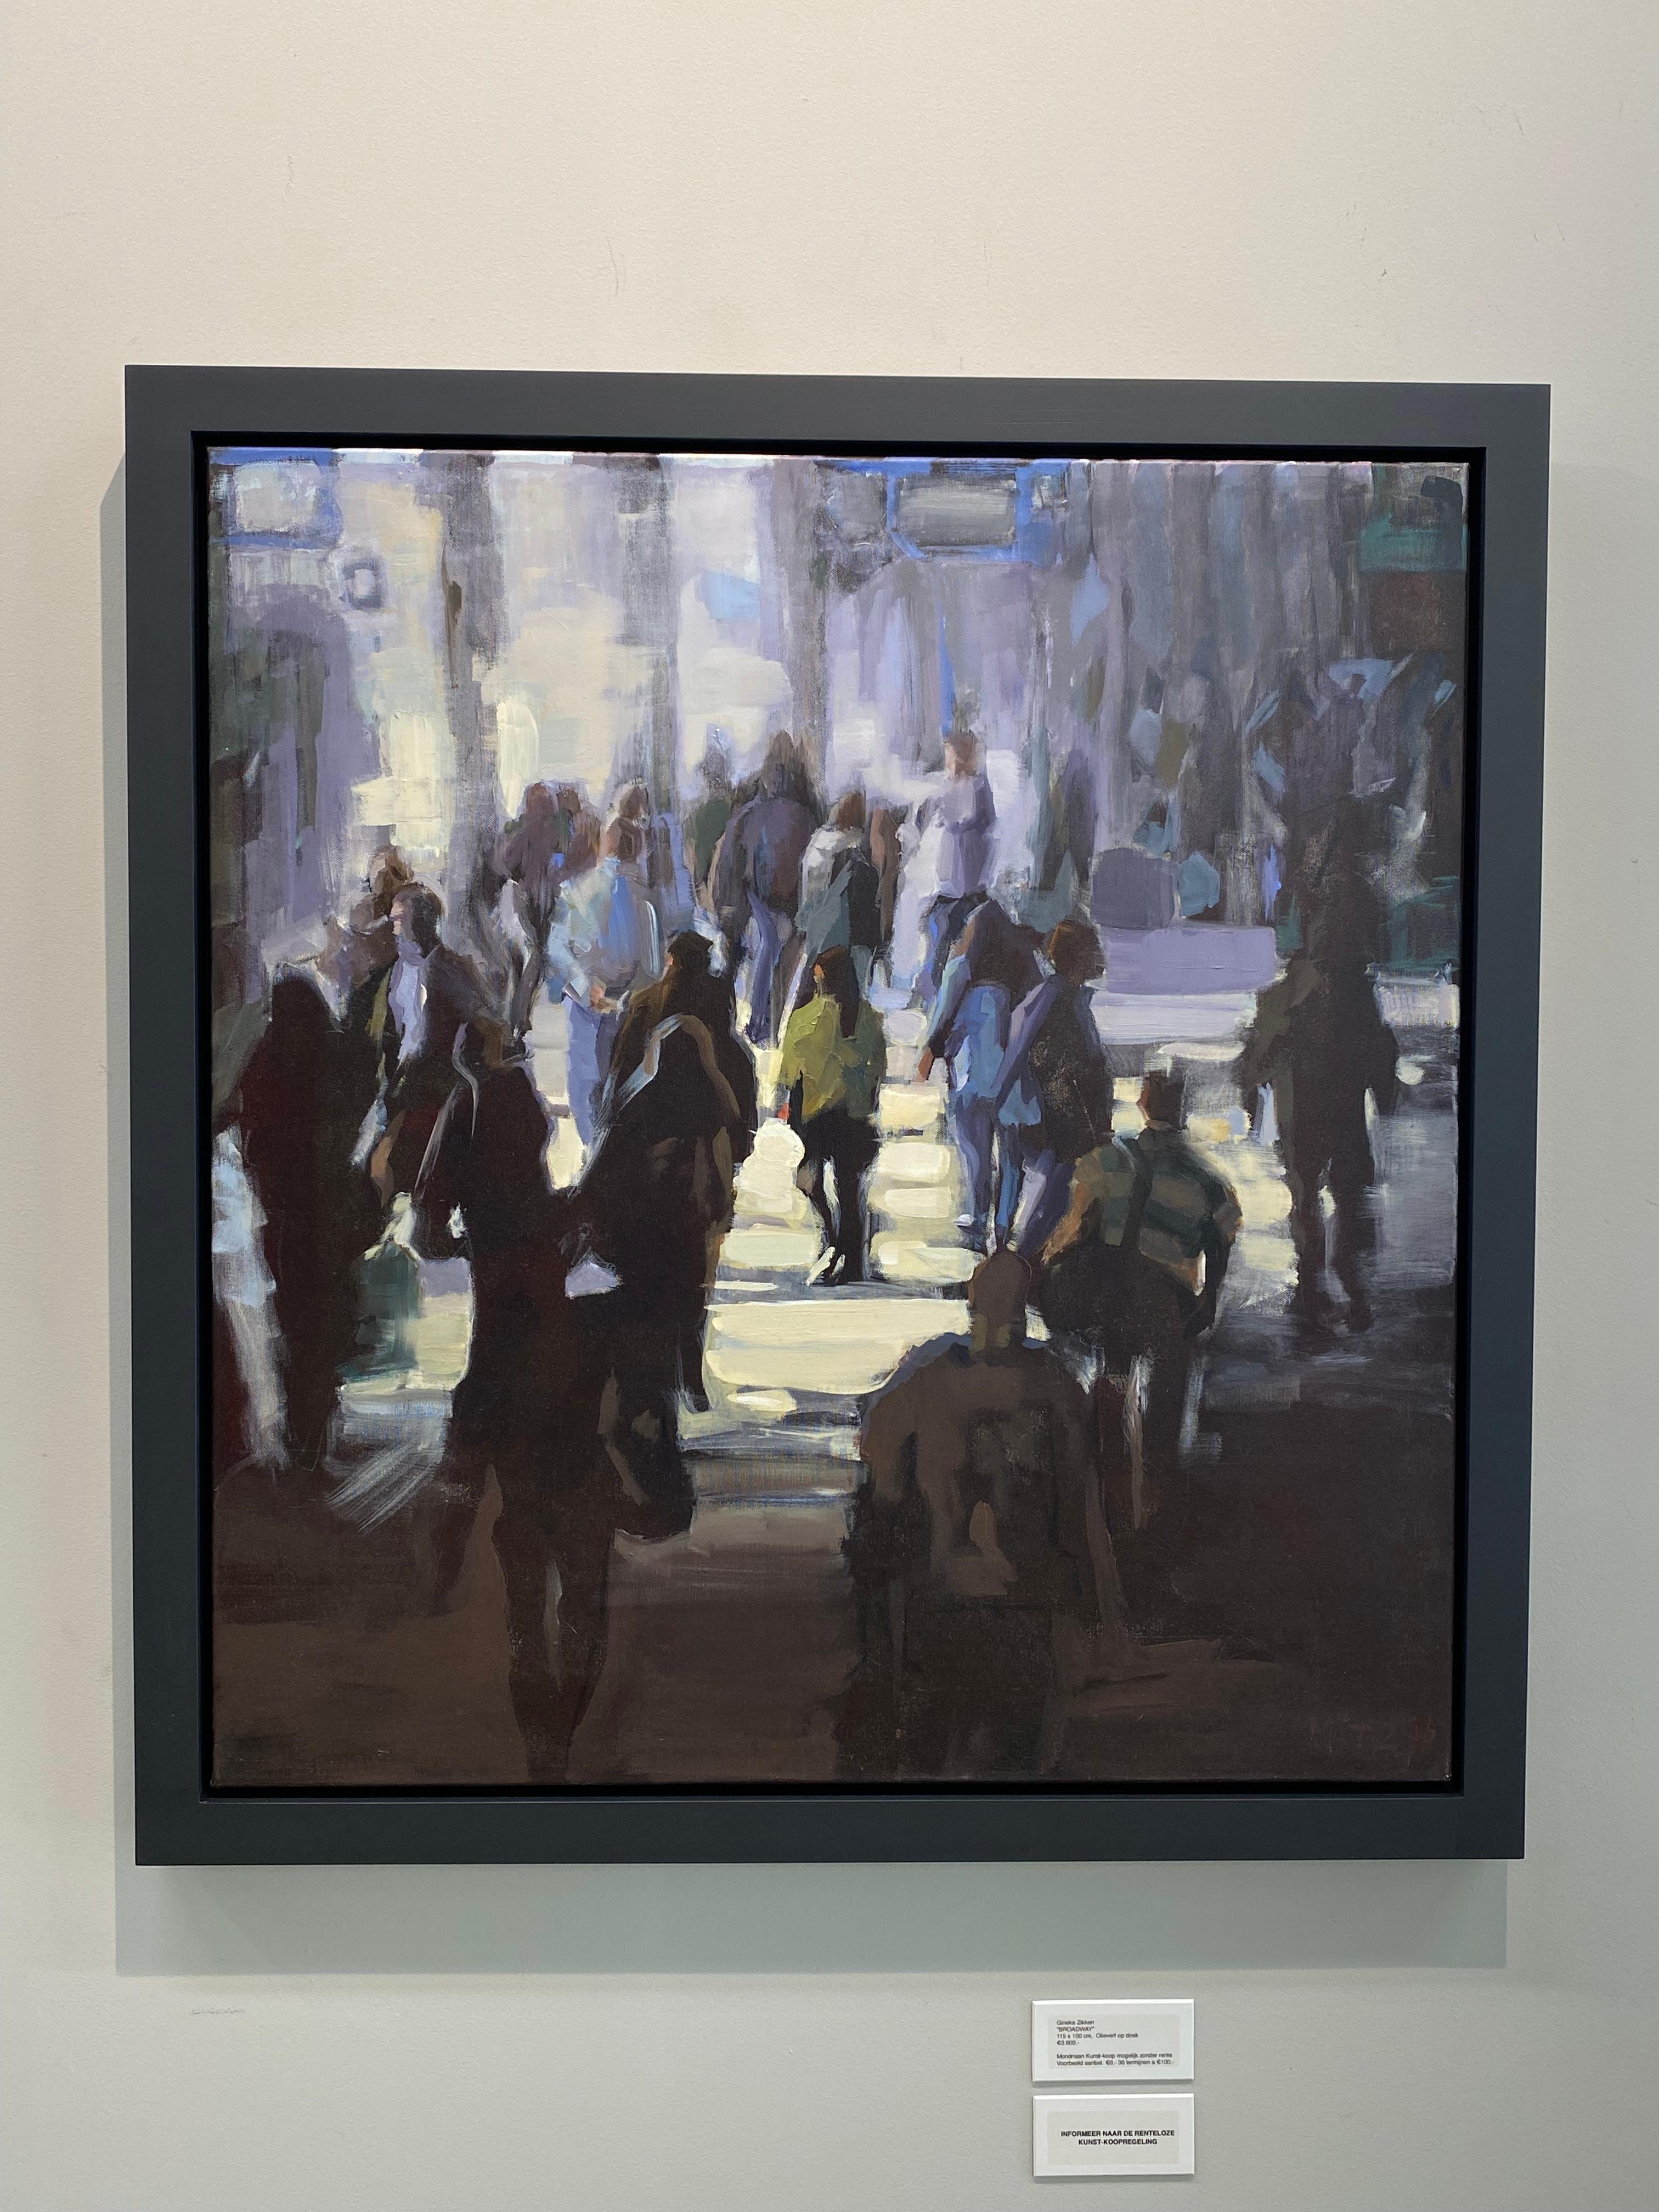 Crowd - 21st Century Contemporary Painting of a walking crowd - Black Figurative Painting by Mitzy Renooy